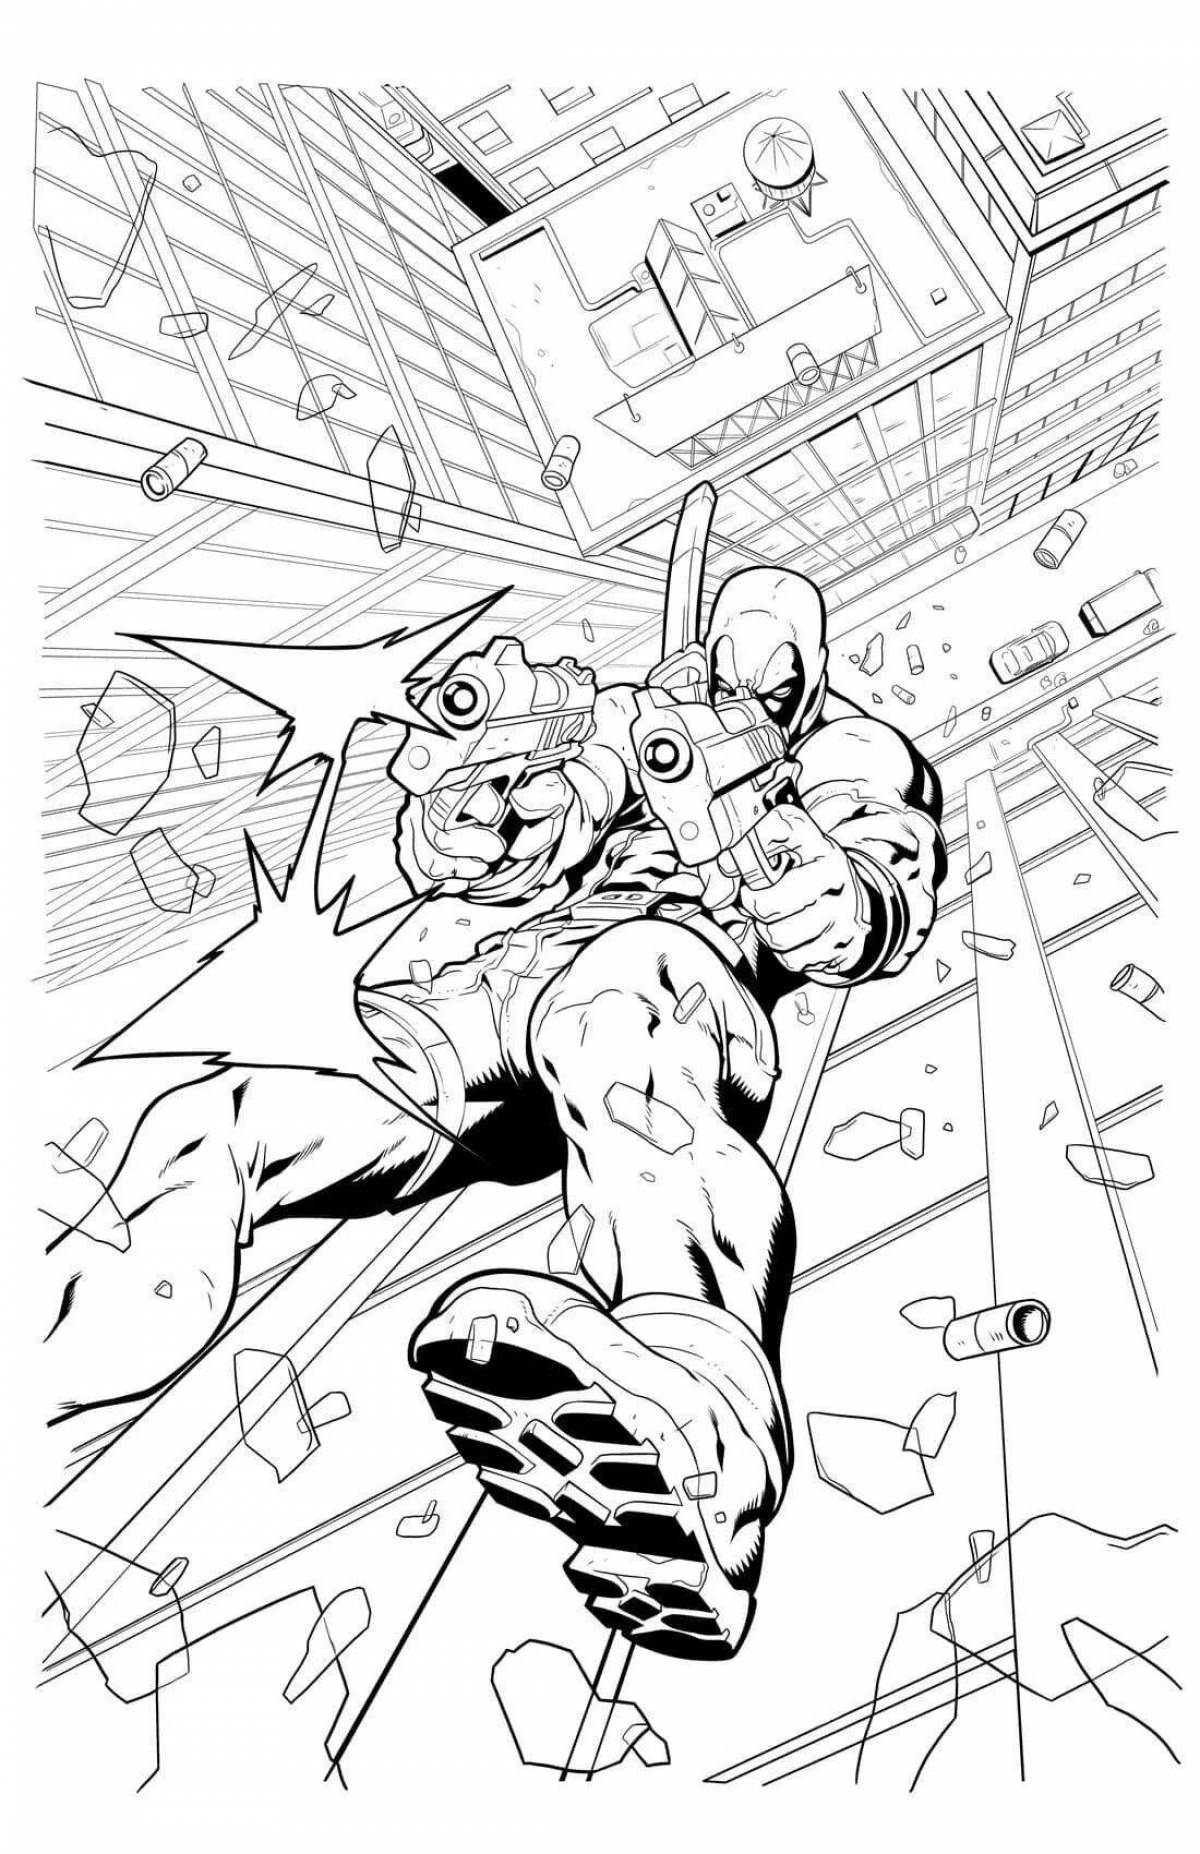 Unique coloring book of deadpool and spiderman for kids